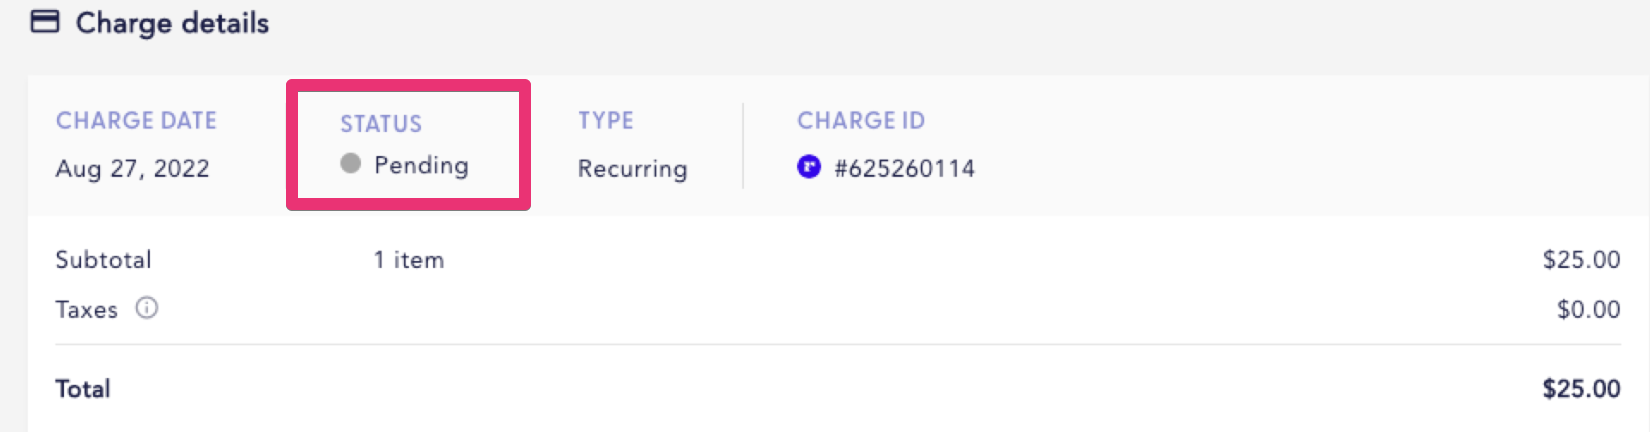 Charge status as Pending under Charge details